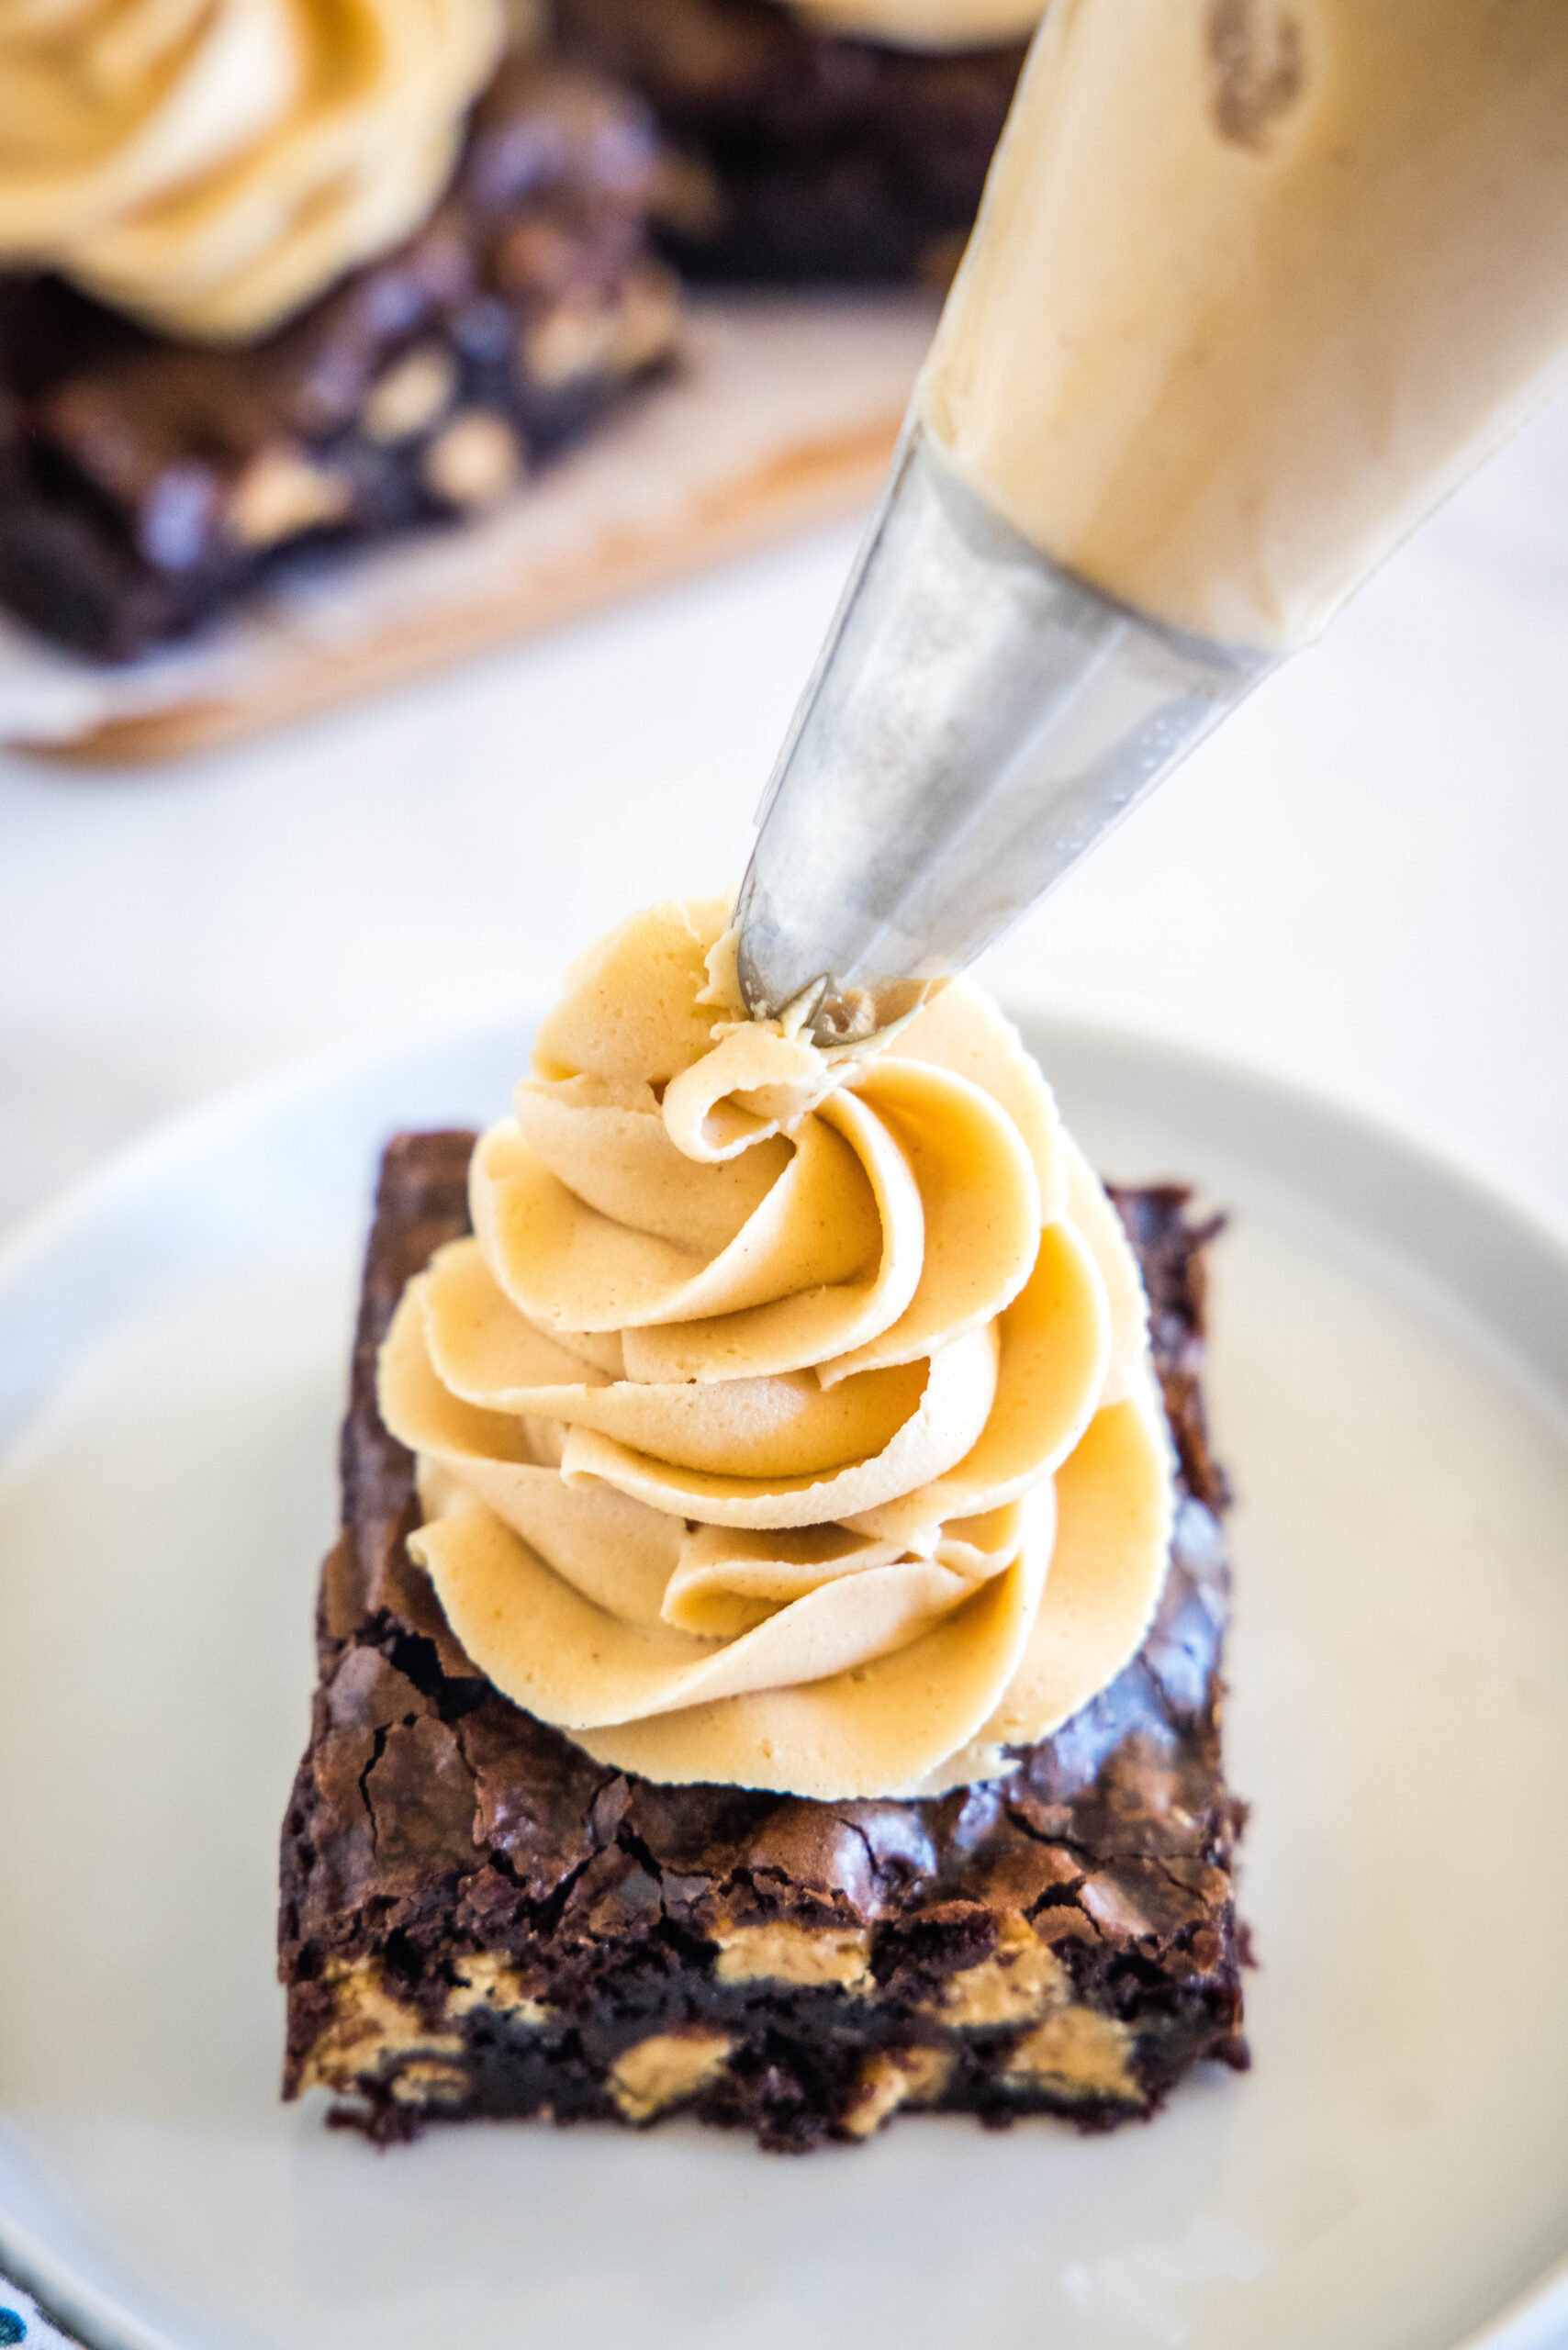 The tip of a piping bag piping a swirl of peanut butter frosting over a chocolate brownie on a white plate.